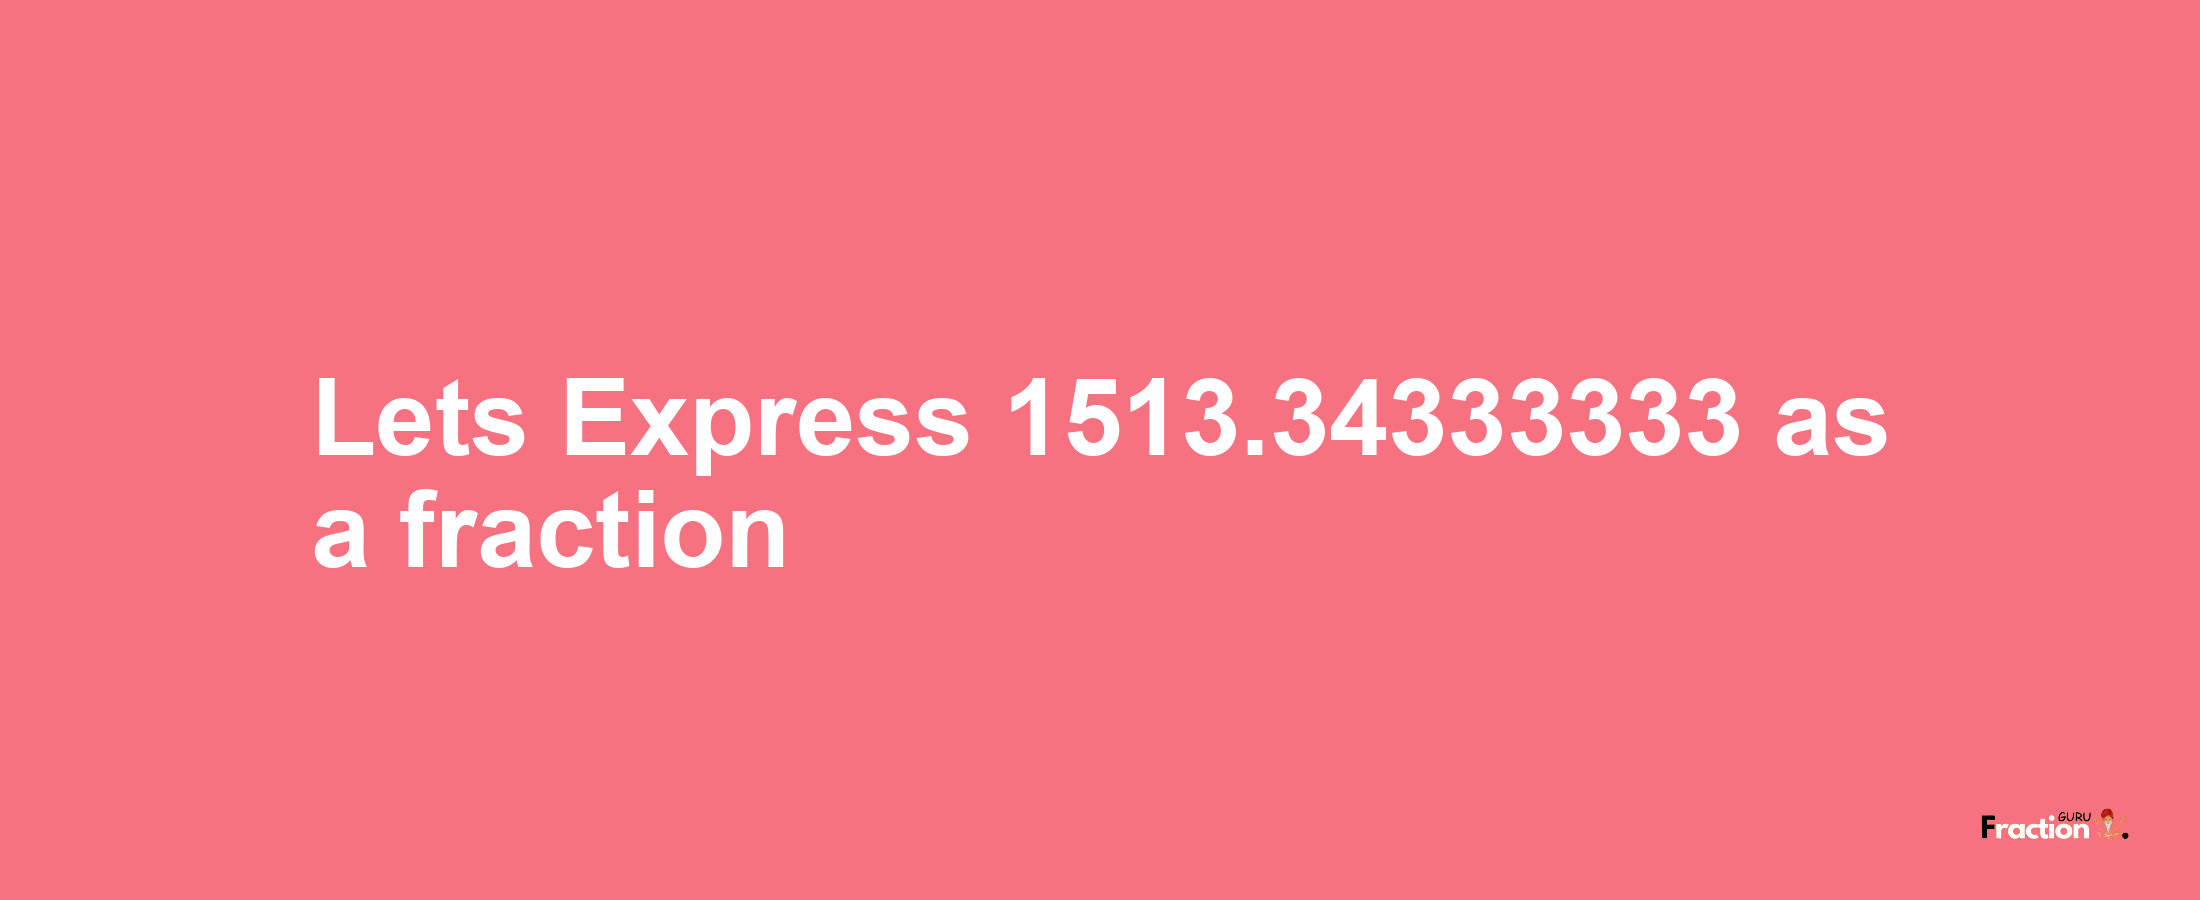 Lets Express 1513.34333333 as afraction